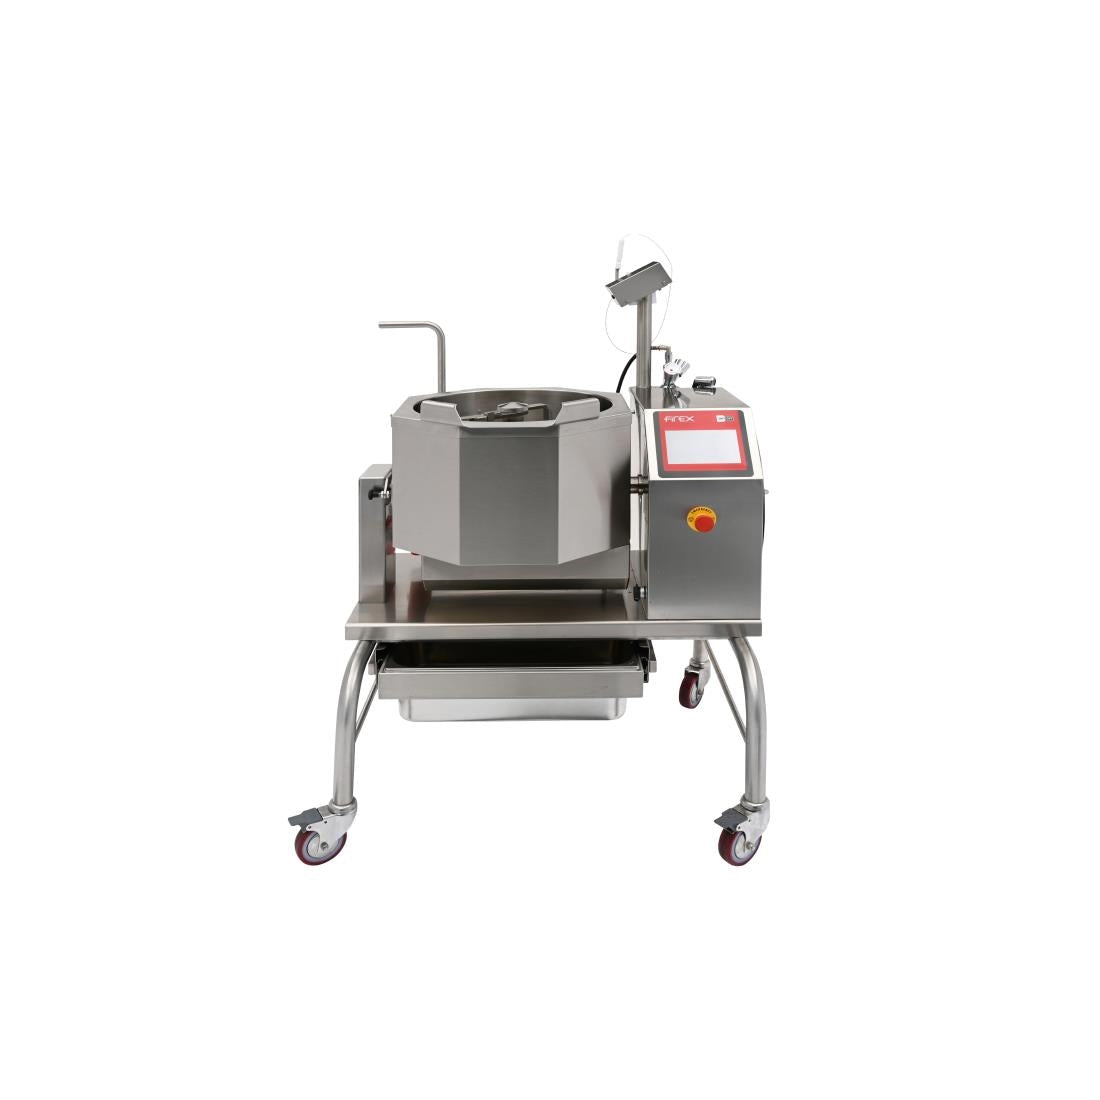 CH241 Firex Cucimix Multipurpose Automated Industrial Cooker JD Catering Equipment Solutions Ltd